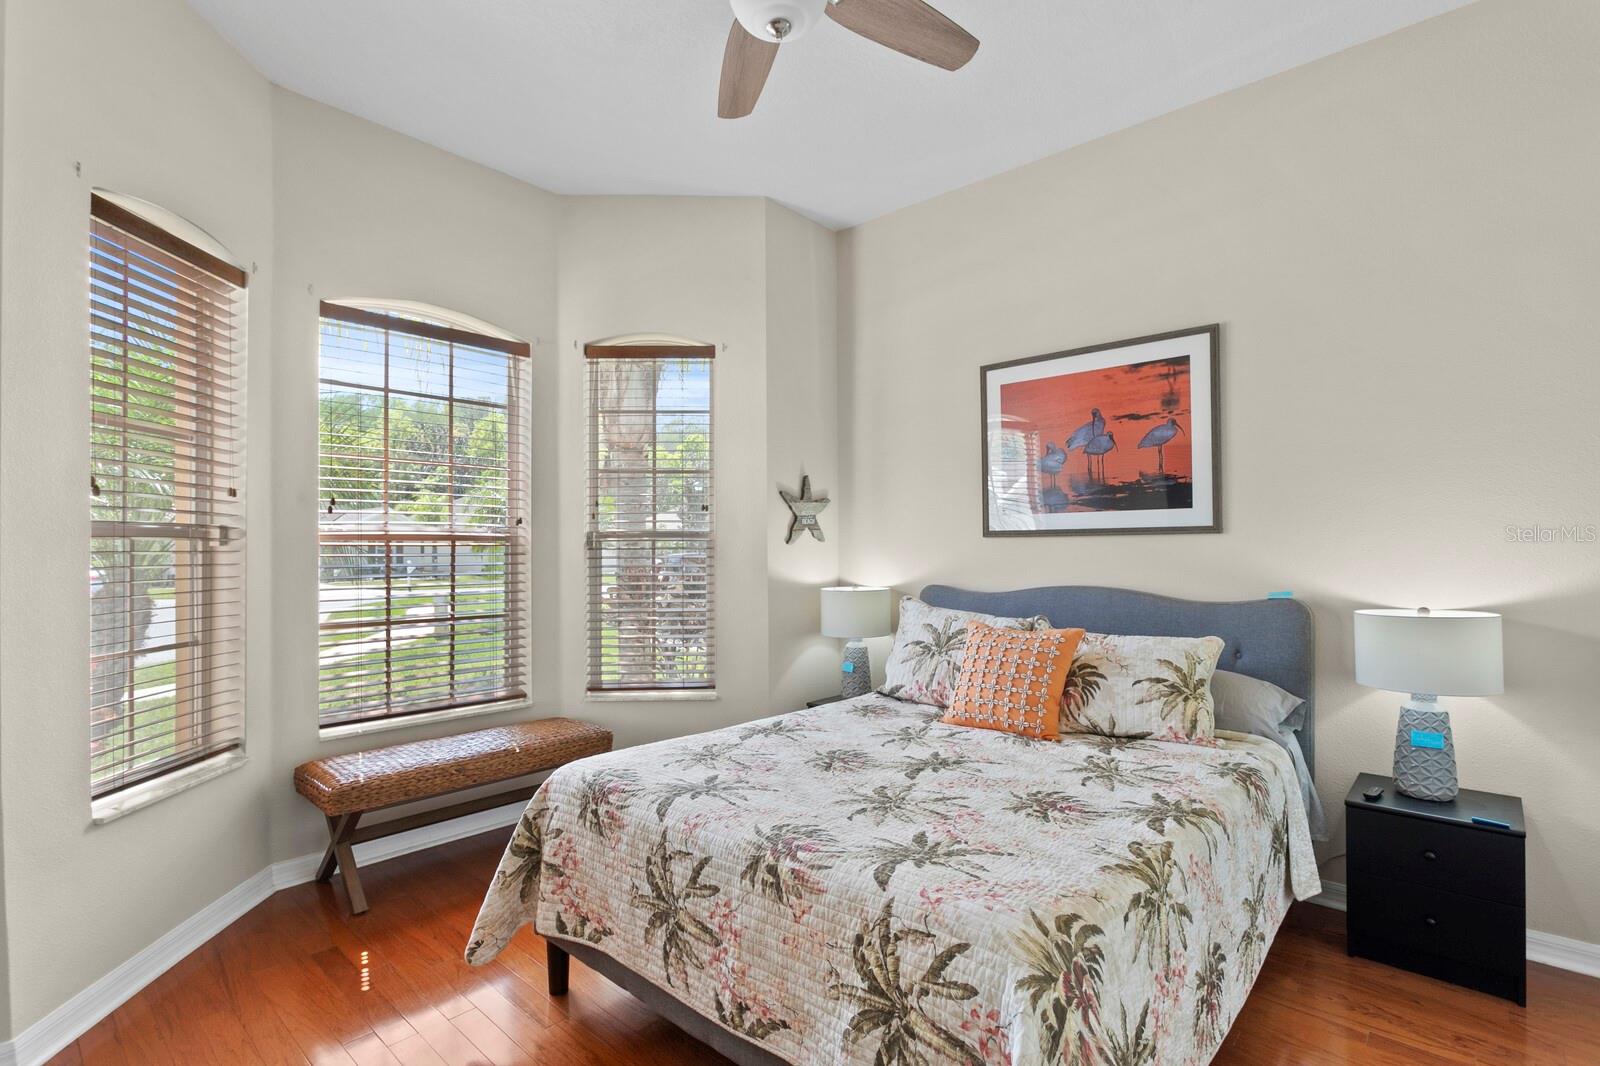 Guest Bedroom With Solid Wood Flooring